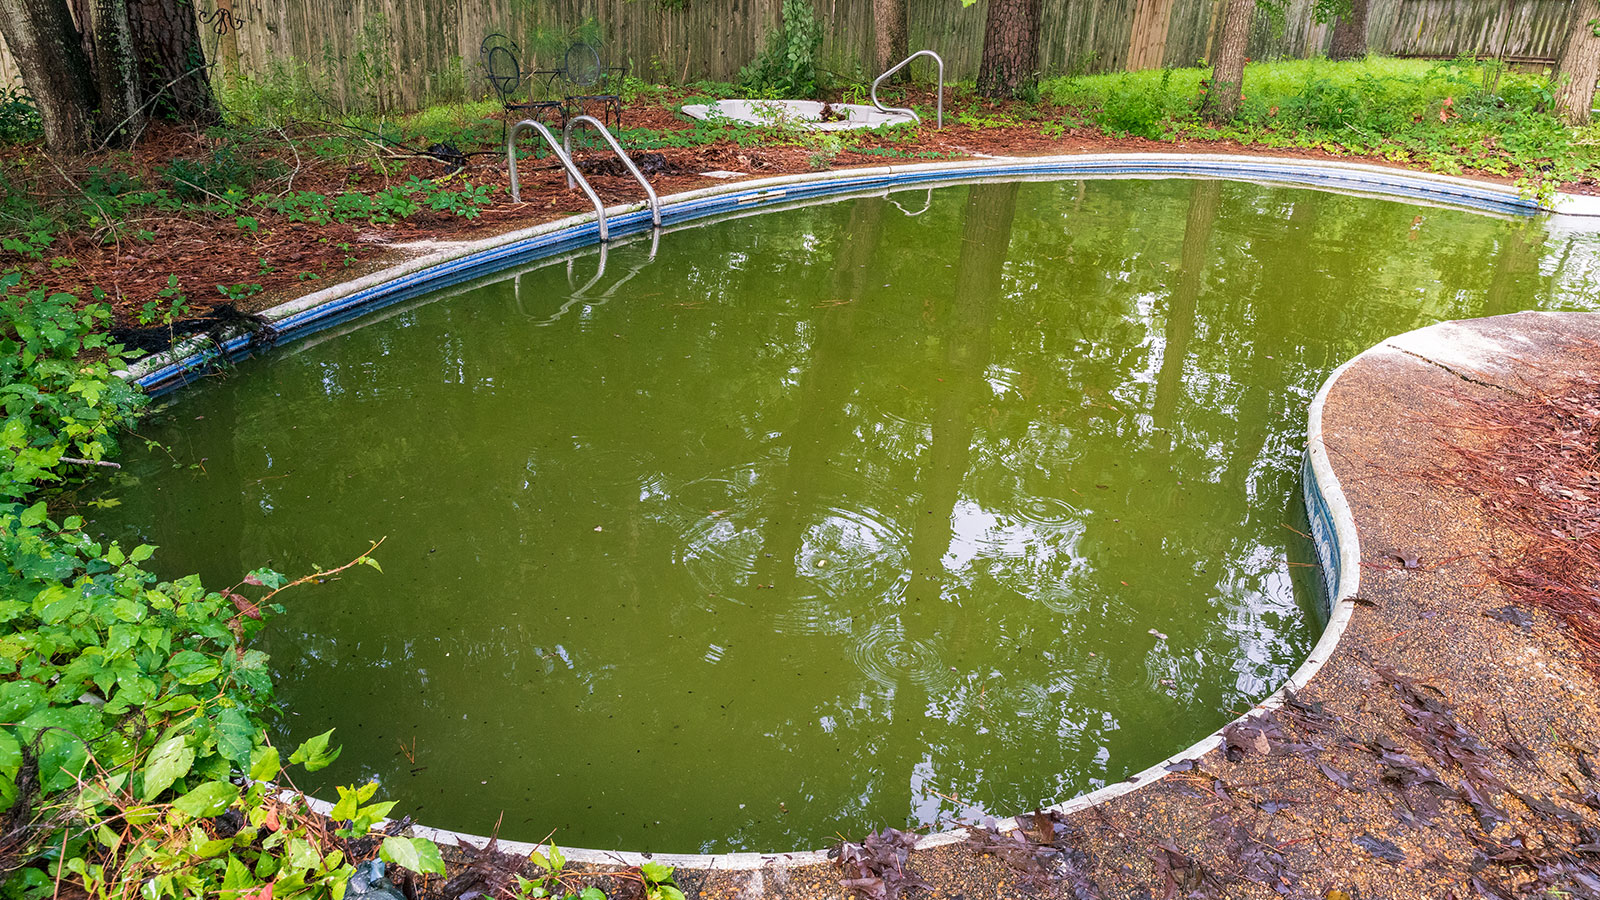 Swimming pool filled with green water